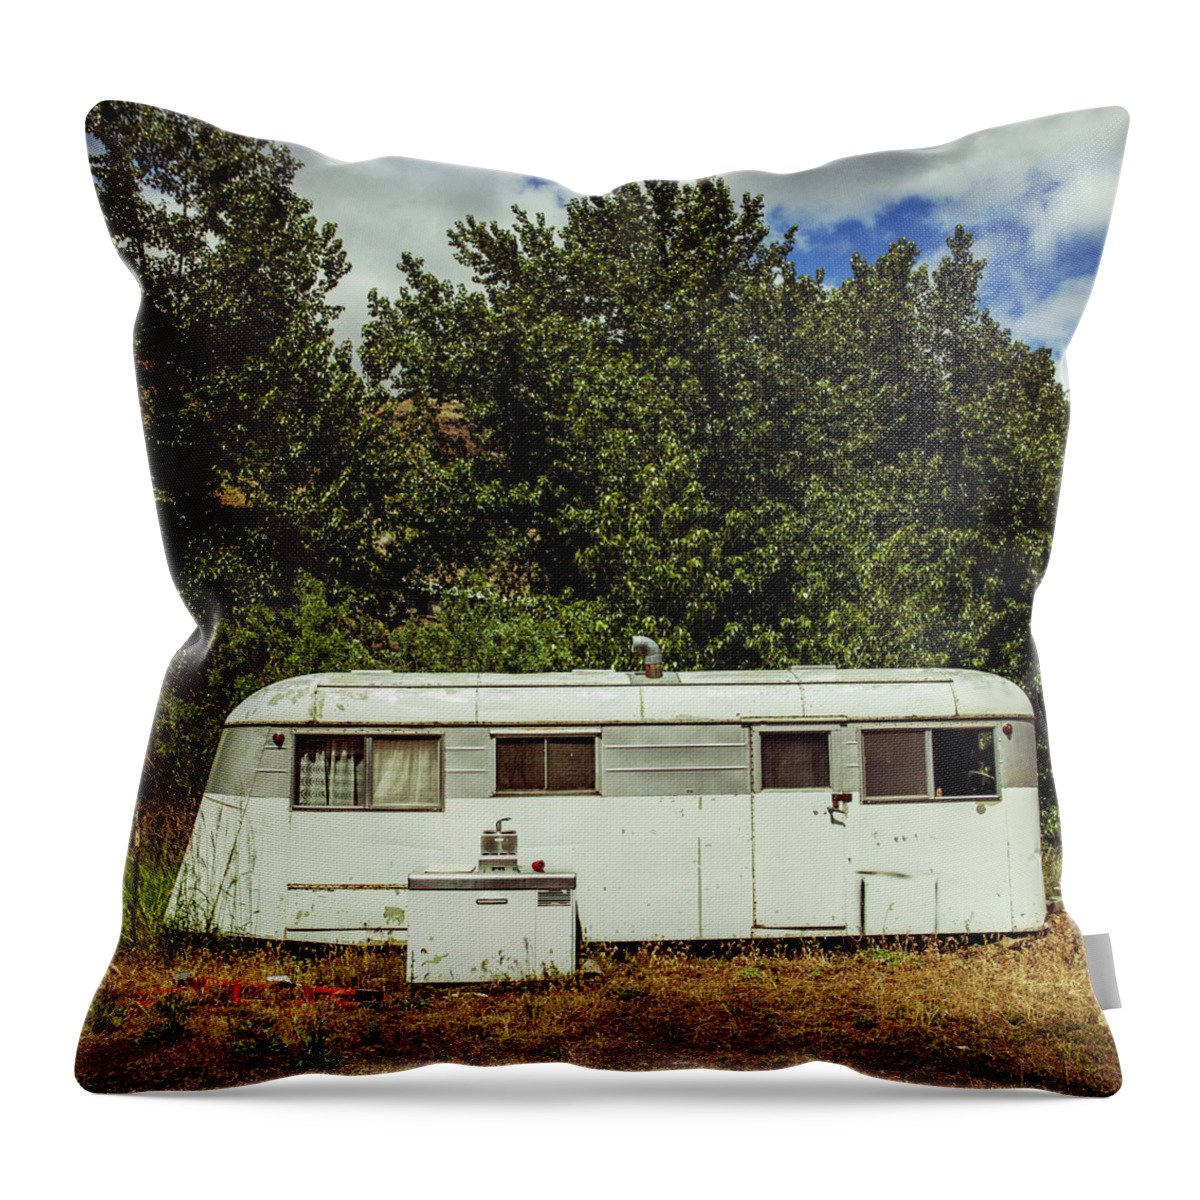 Camping Throw Pillow featuring the photograph Abandoned Trailer by Andipantz